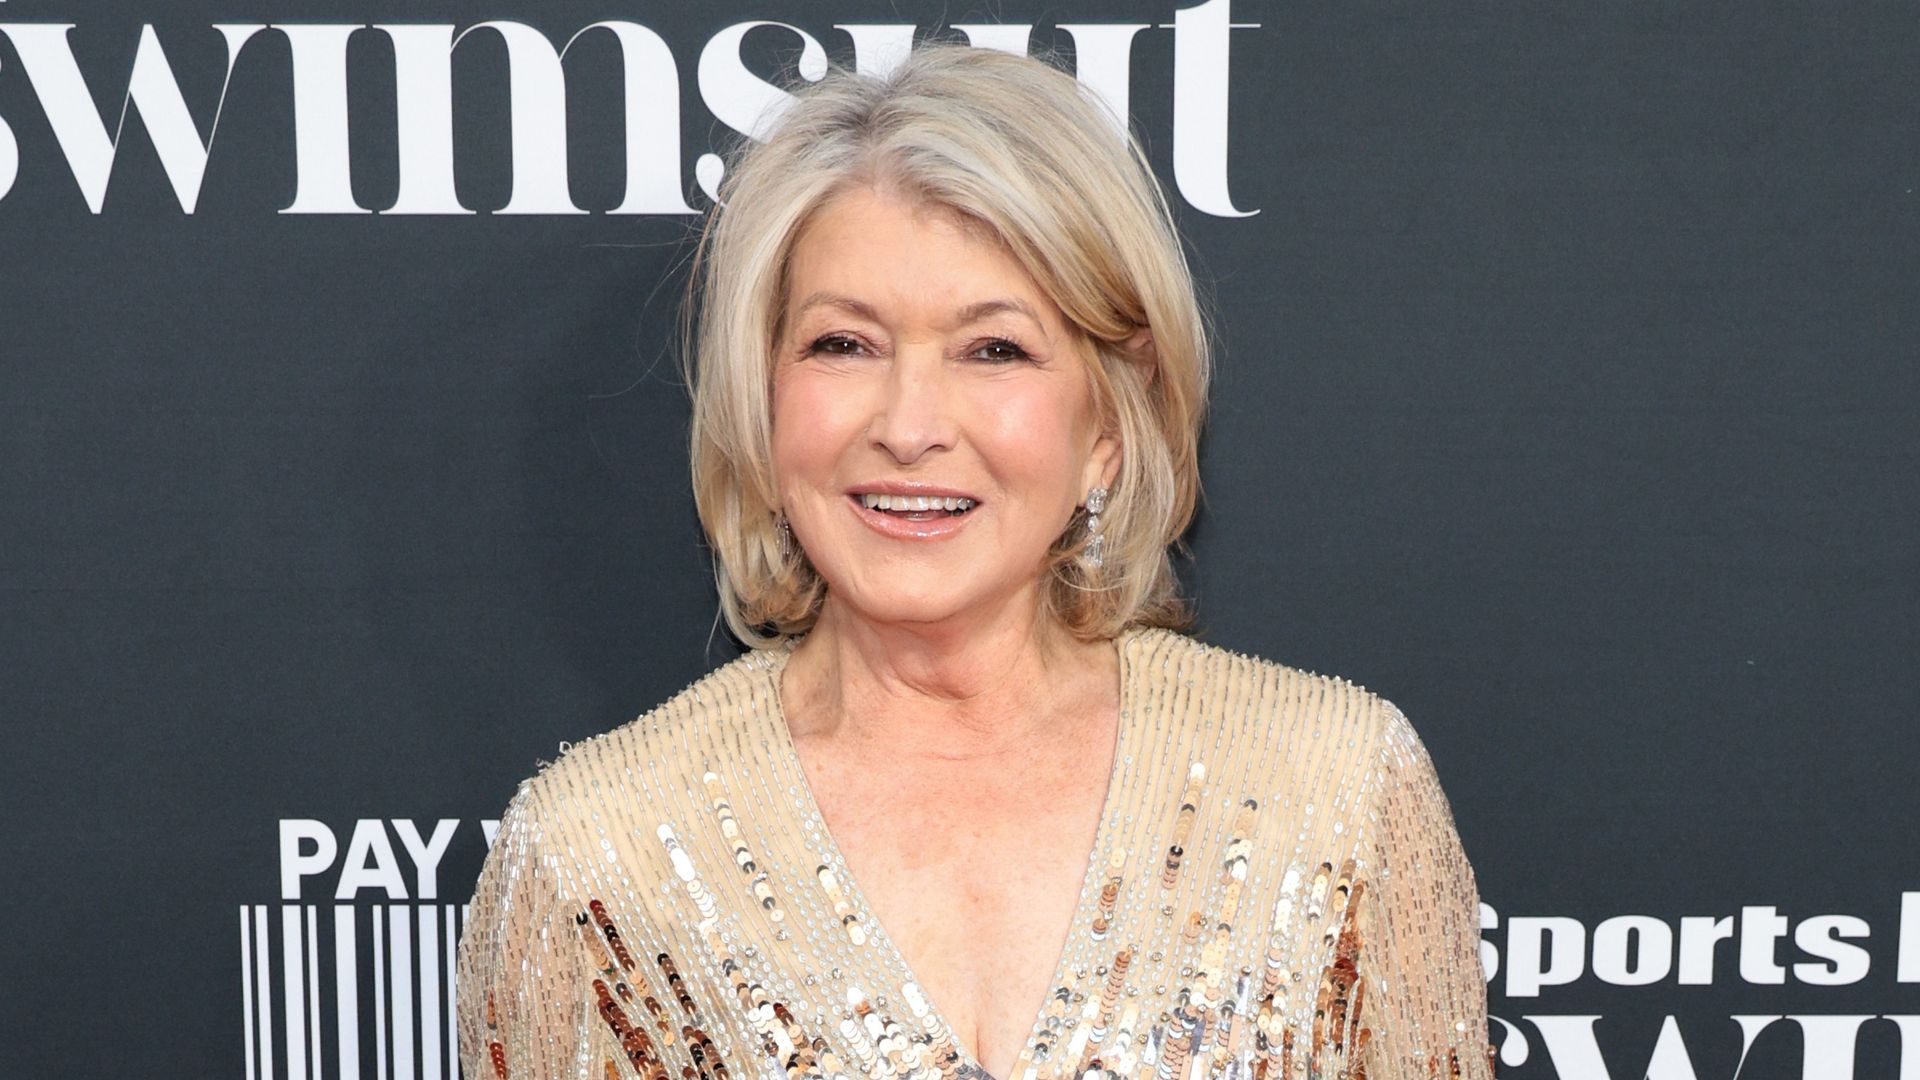 Martha Stewart's age-defying appearance at 82 leaves fans in disbelief